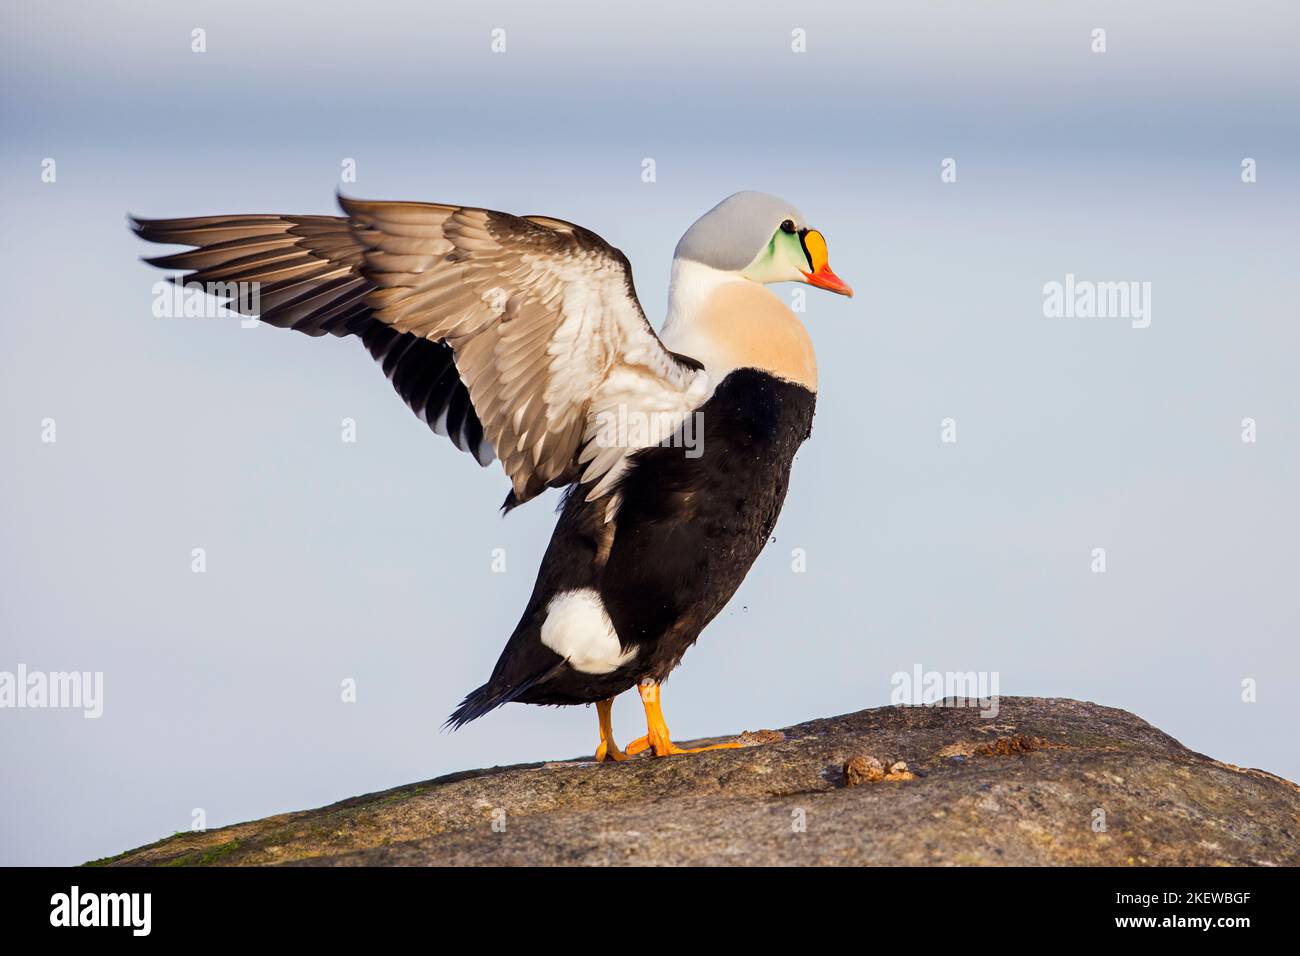 King eider (Somateria spectabilis) male sea duck in breeding plumage on rock flapping wings in winter Stock Photo